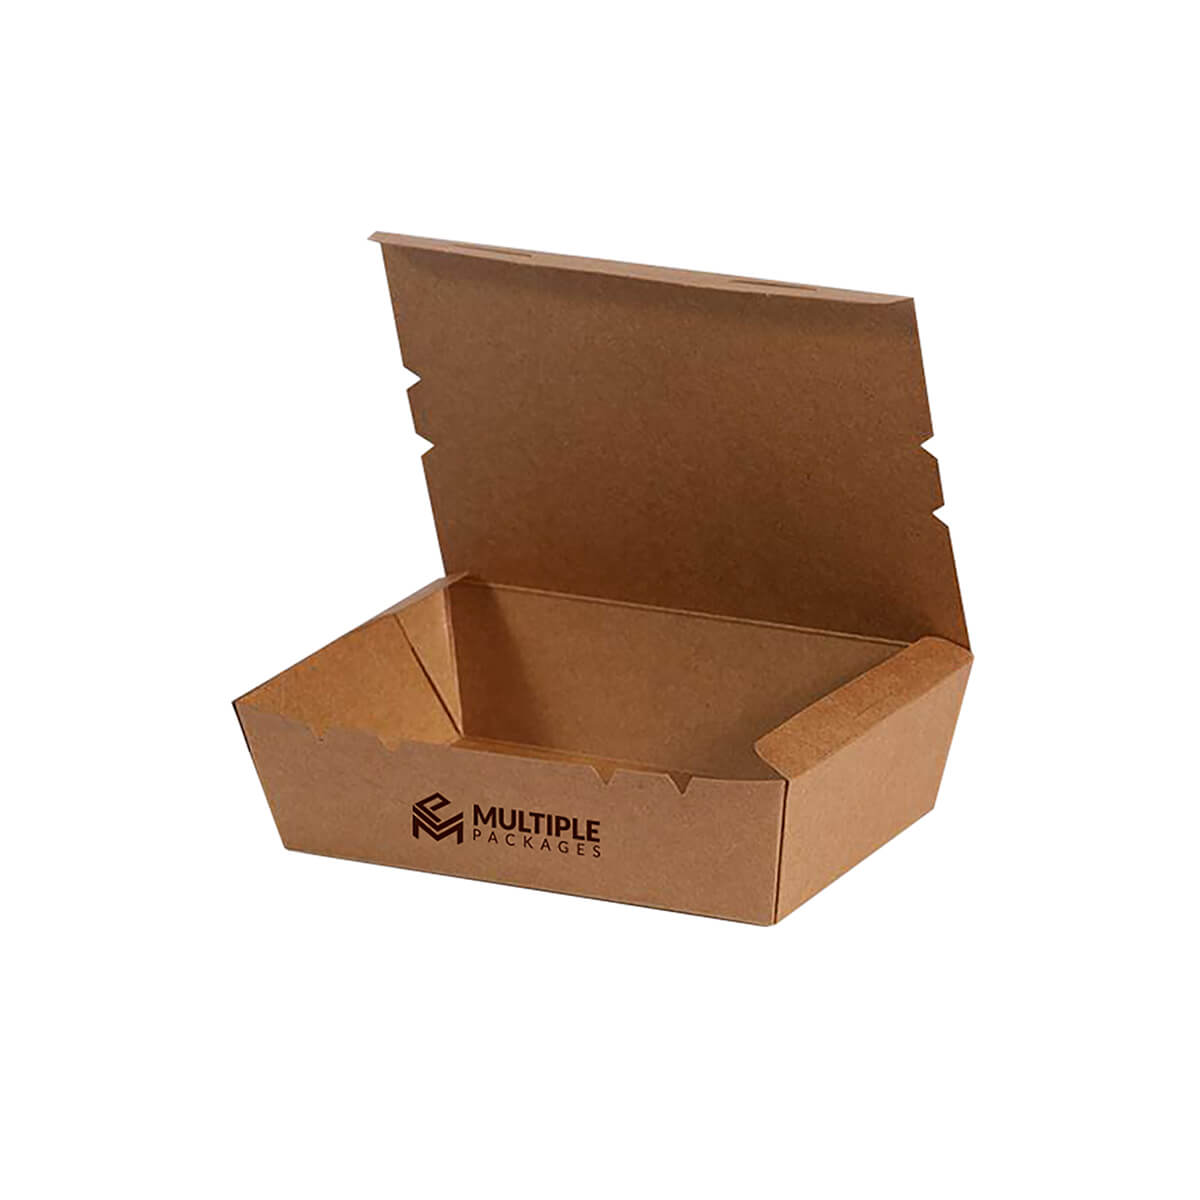 Custom Chinese Takeout Food Boxes - Tribrid Packaging